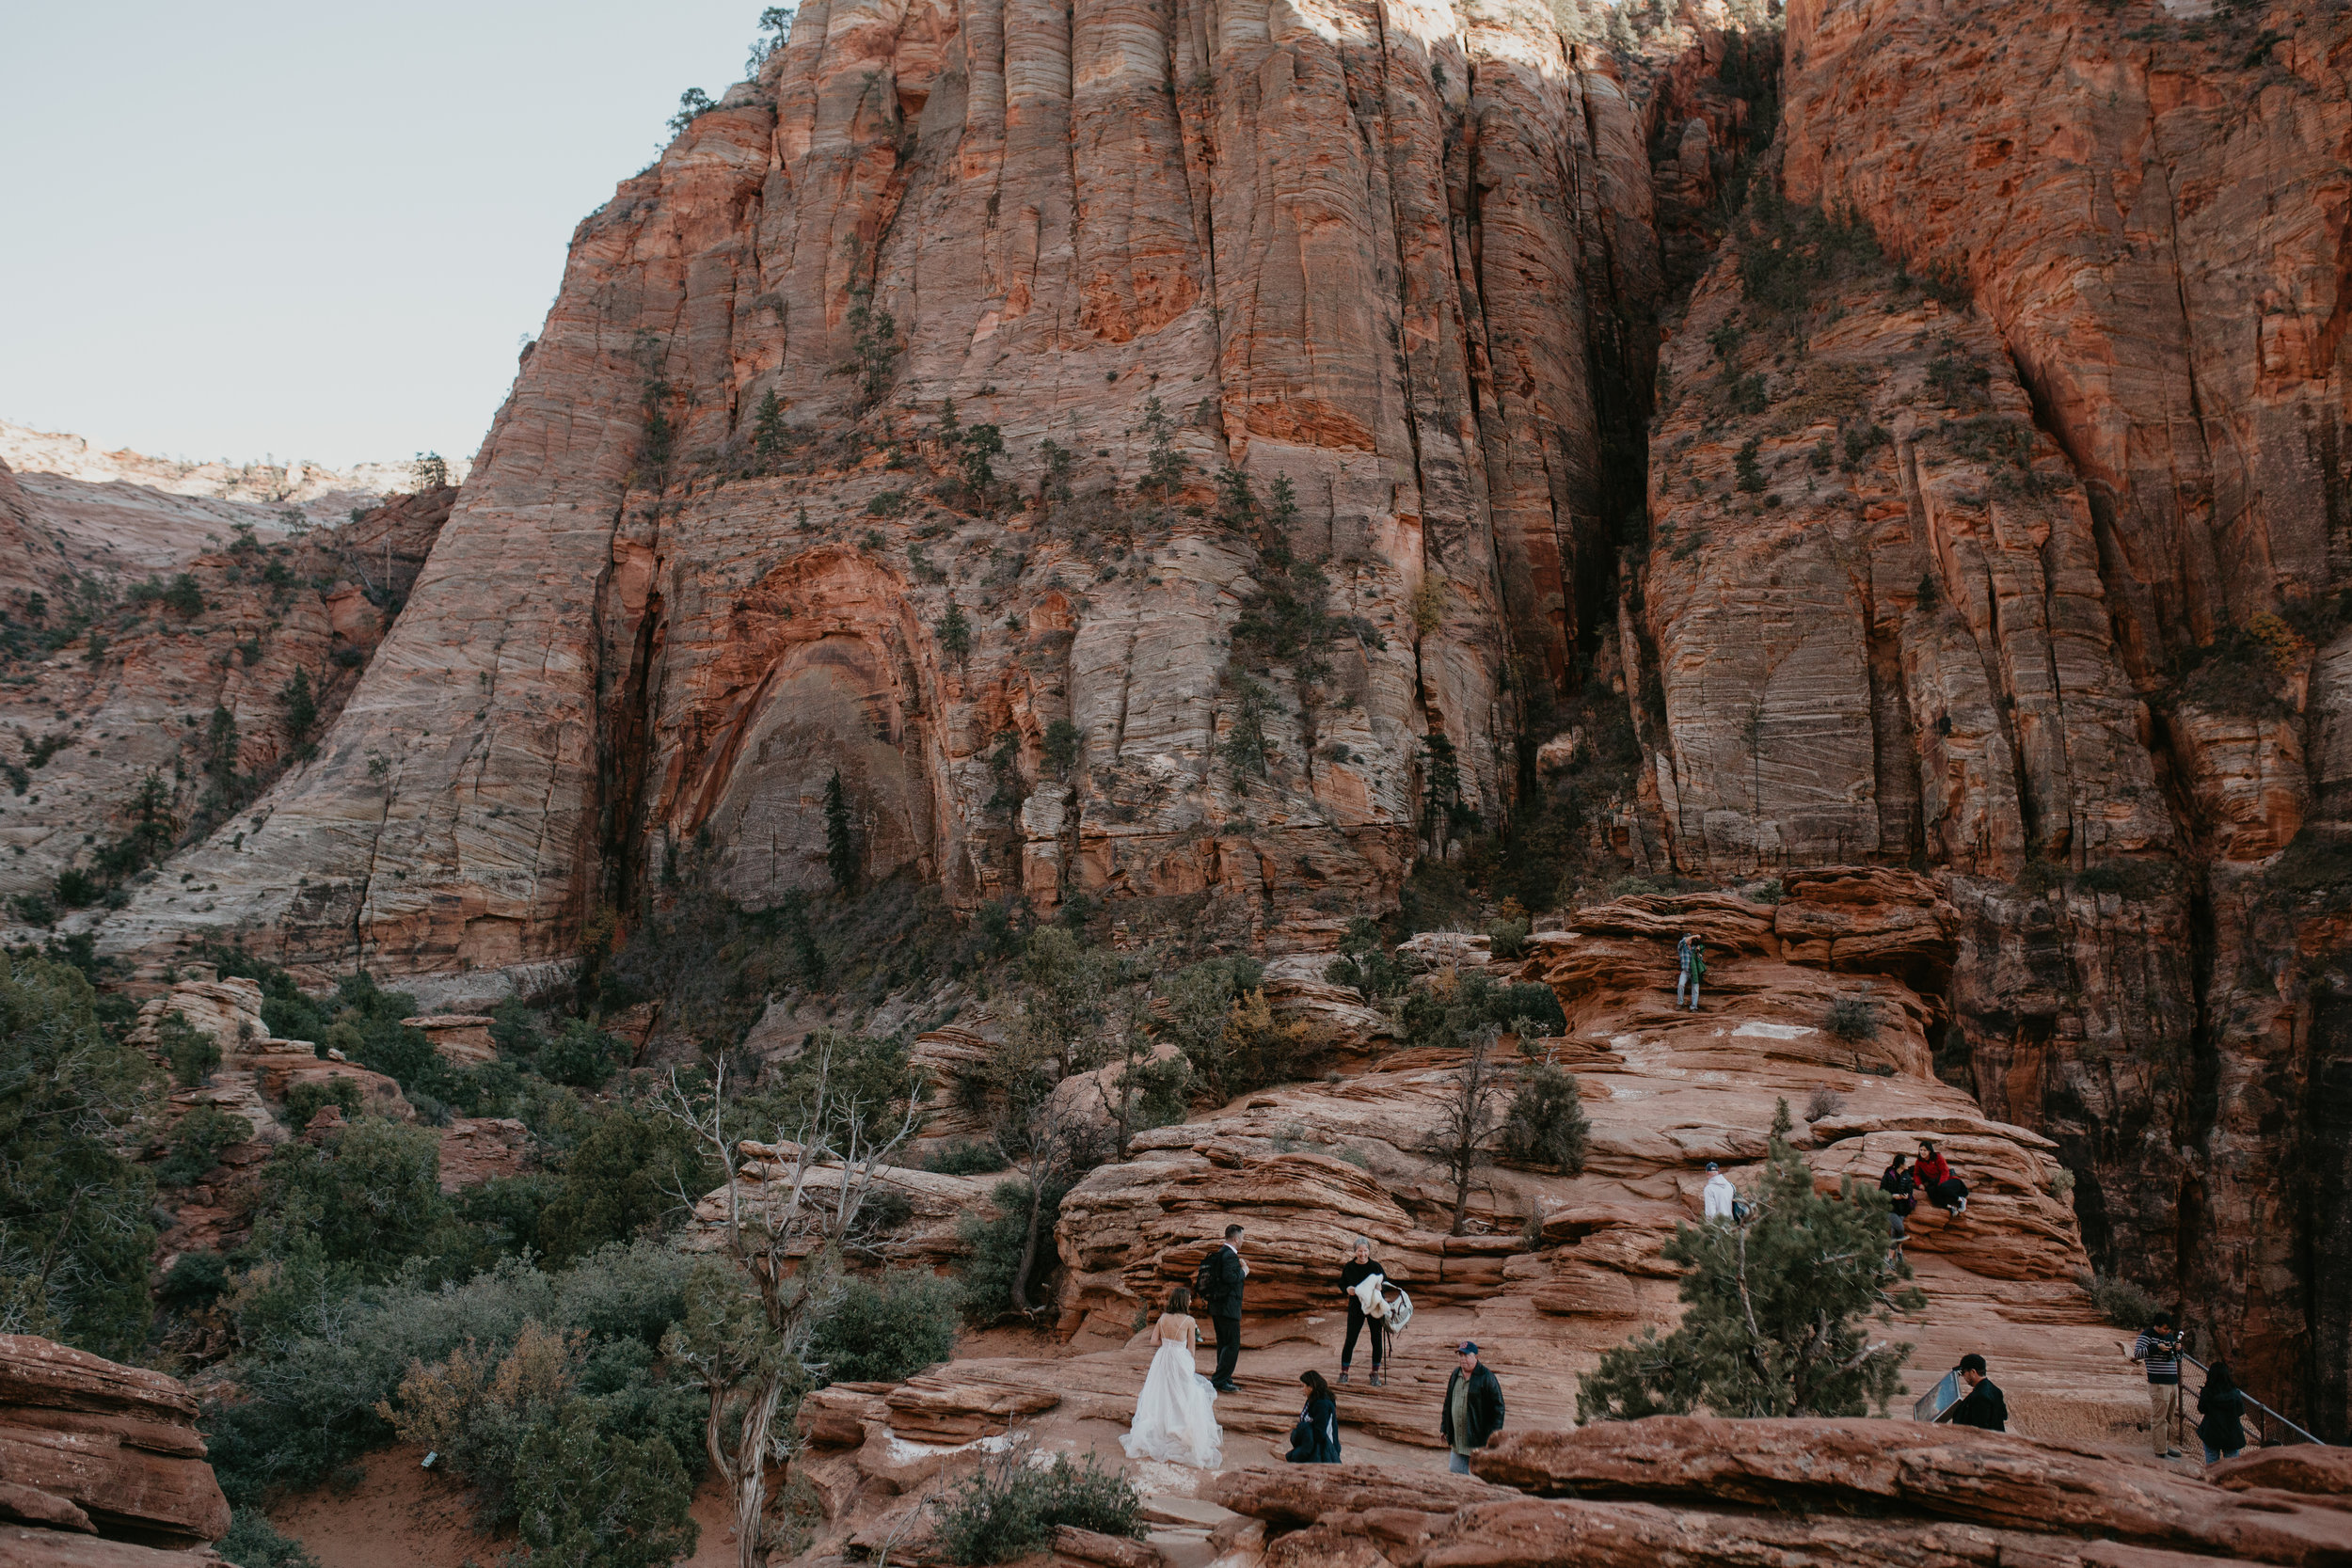 nicole-daacke-photography-zion-national-park-elopement-photographer-canyon-overlook-trail-elope-hiking-adventure-wedding-photos-fall-utah-red-rock-canyon-stgeorge-eloping-photographer-38.jpg